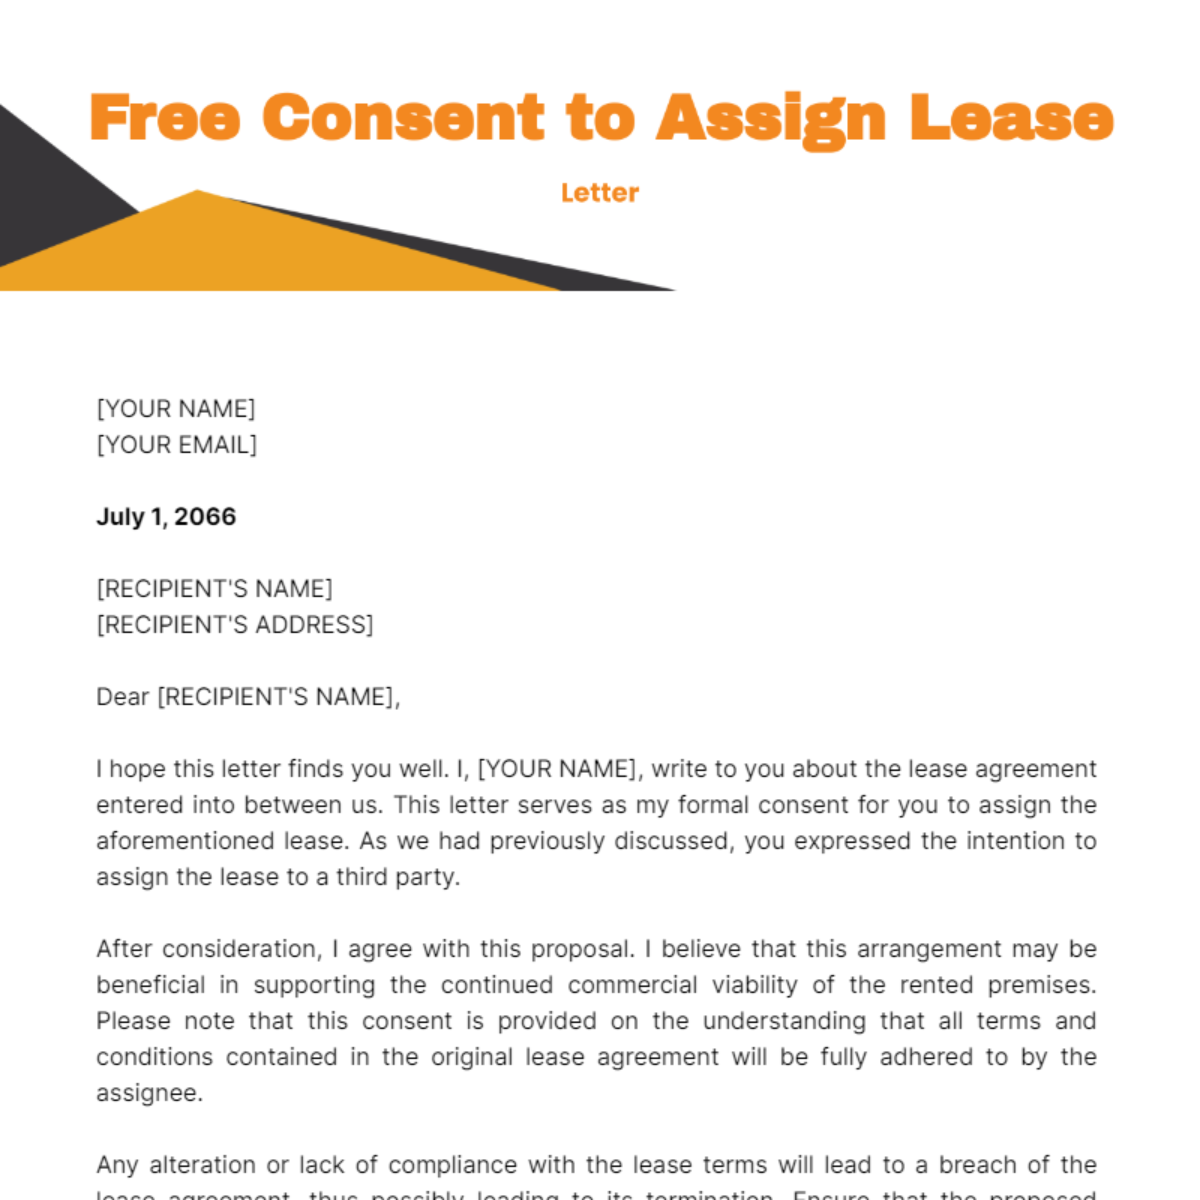 Consent to Assign Lease Letter Template